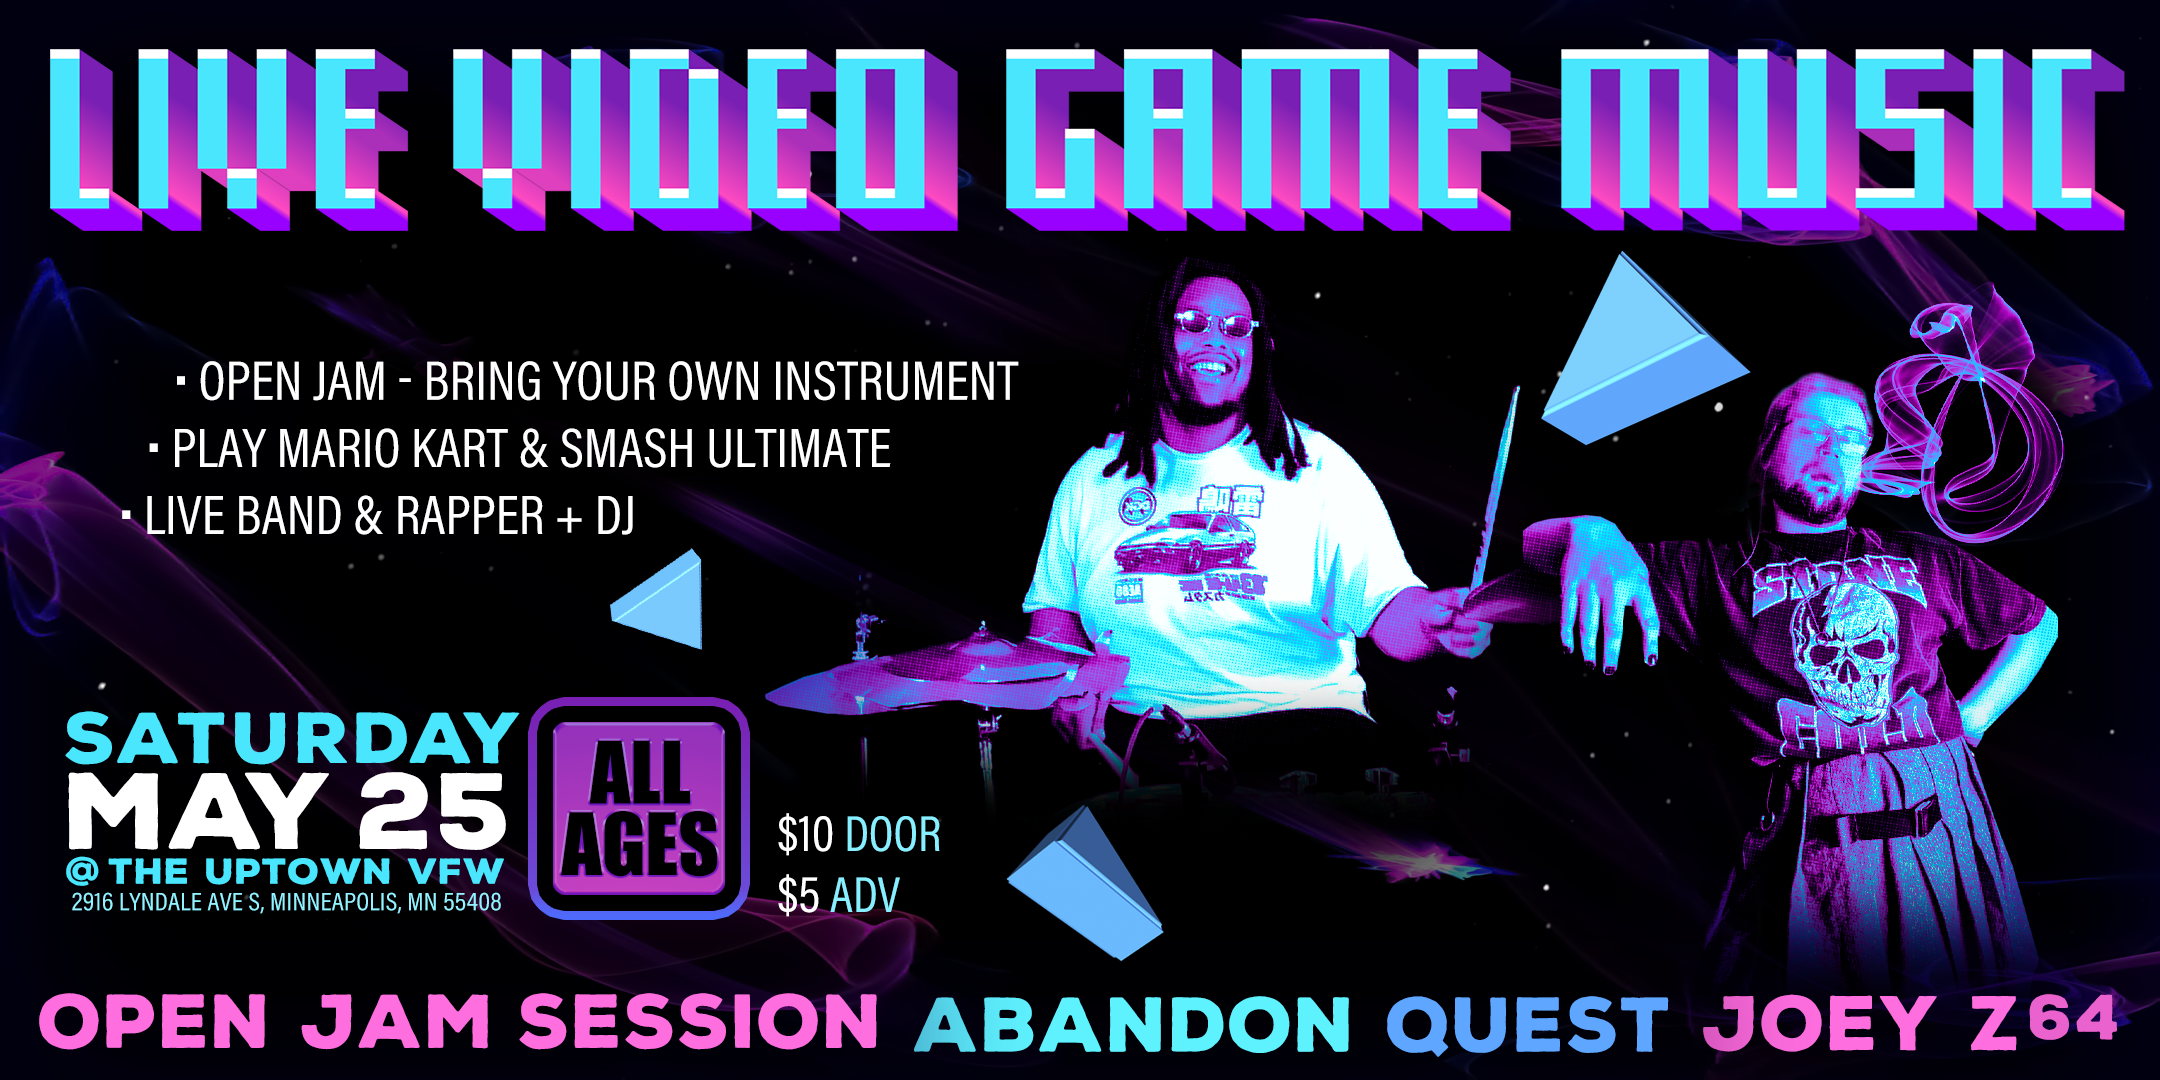 LIVE VIDEO GAME MUSIC: Jam Session | Abandon Quest | Joey Z64 Saturday, May 25 James Ballentine "Uptown" VFW Post 246 Doors 12:00pm :: Show 12:00pm :: All Ages GA $5 ADV / $10 DOS NO REFUNDS Ticket On-Sale Now